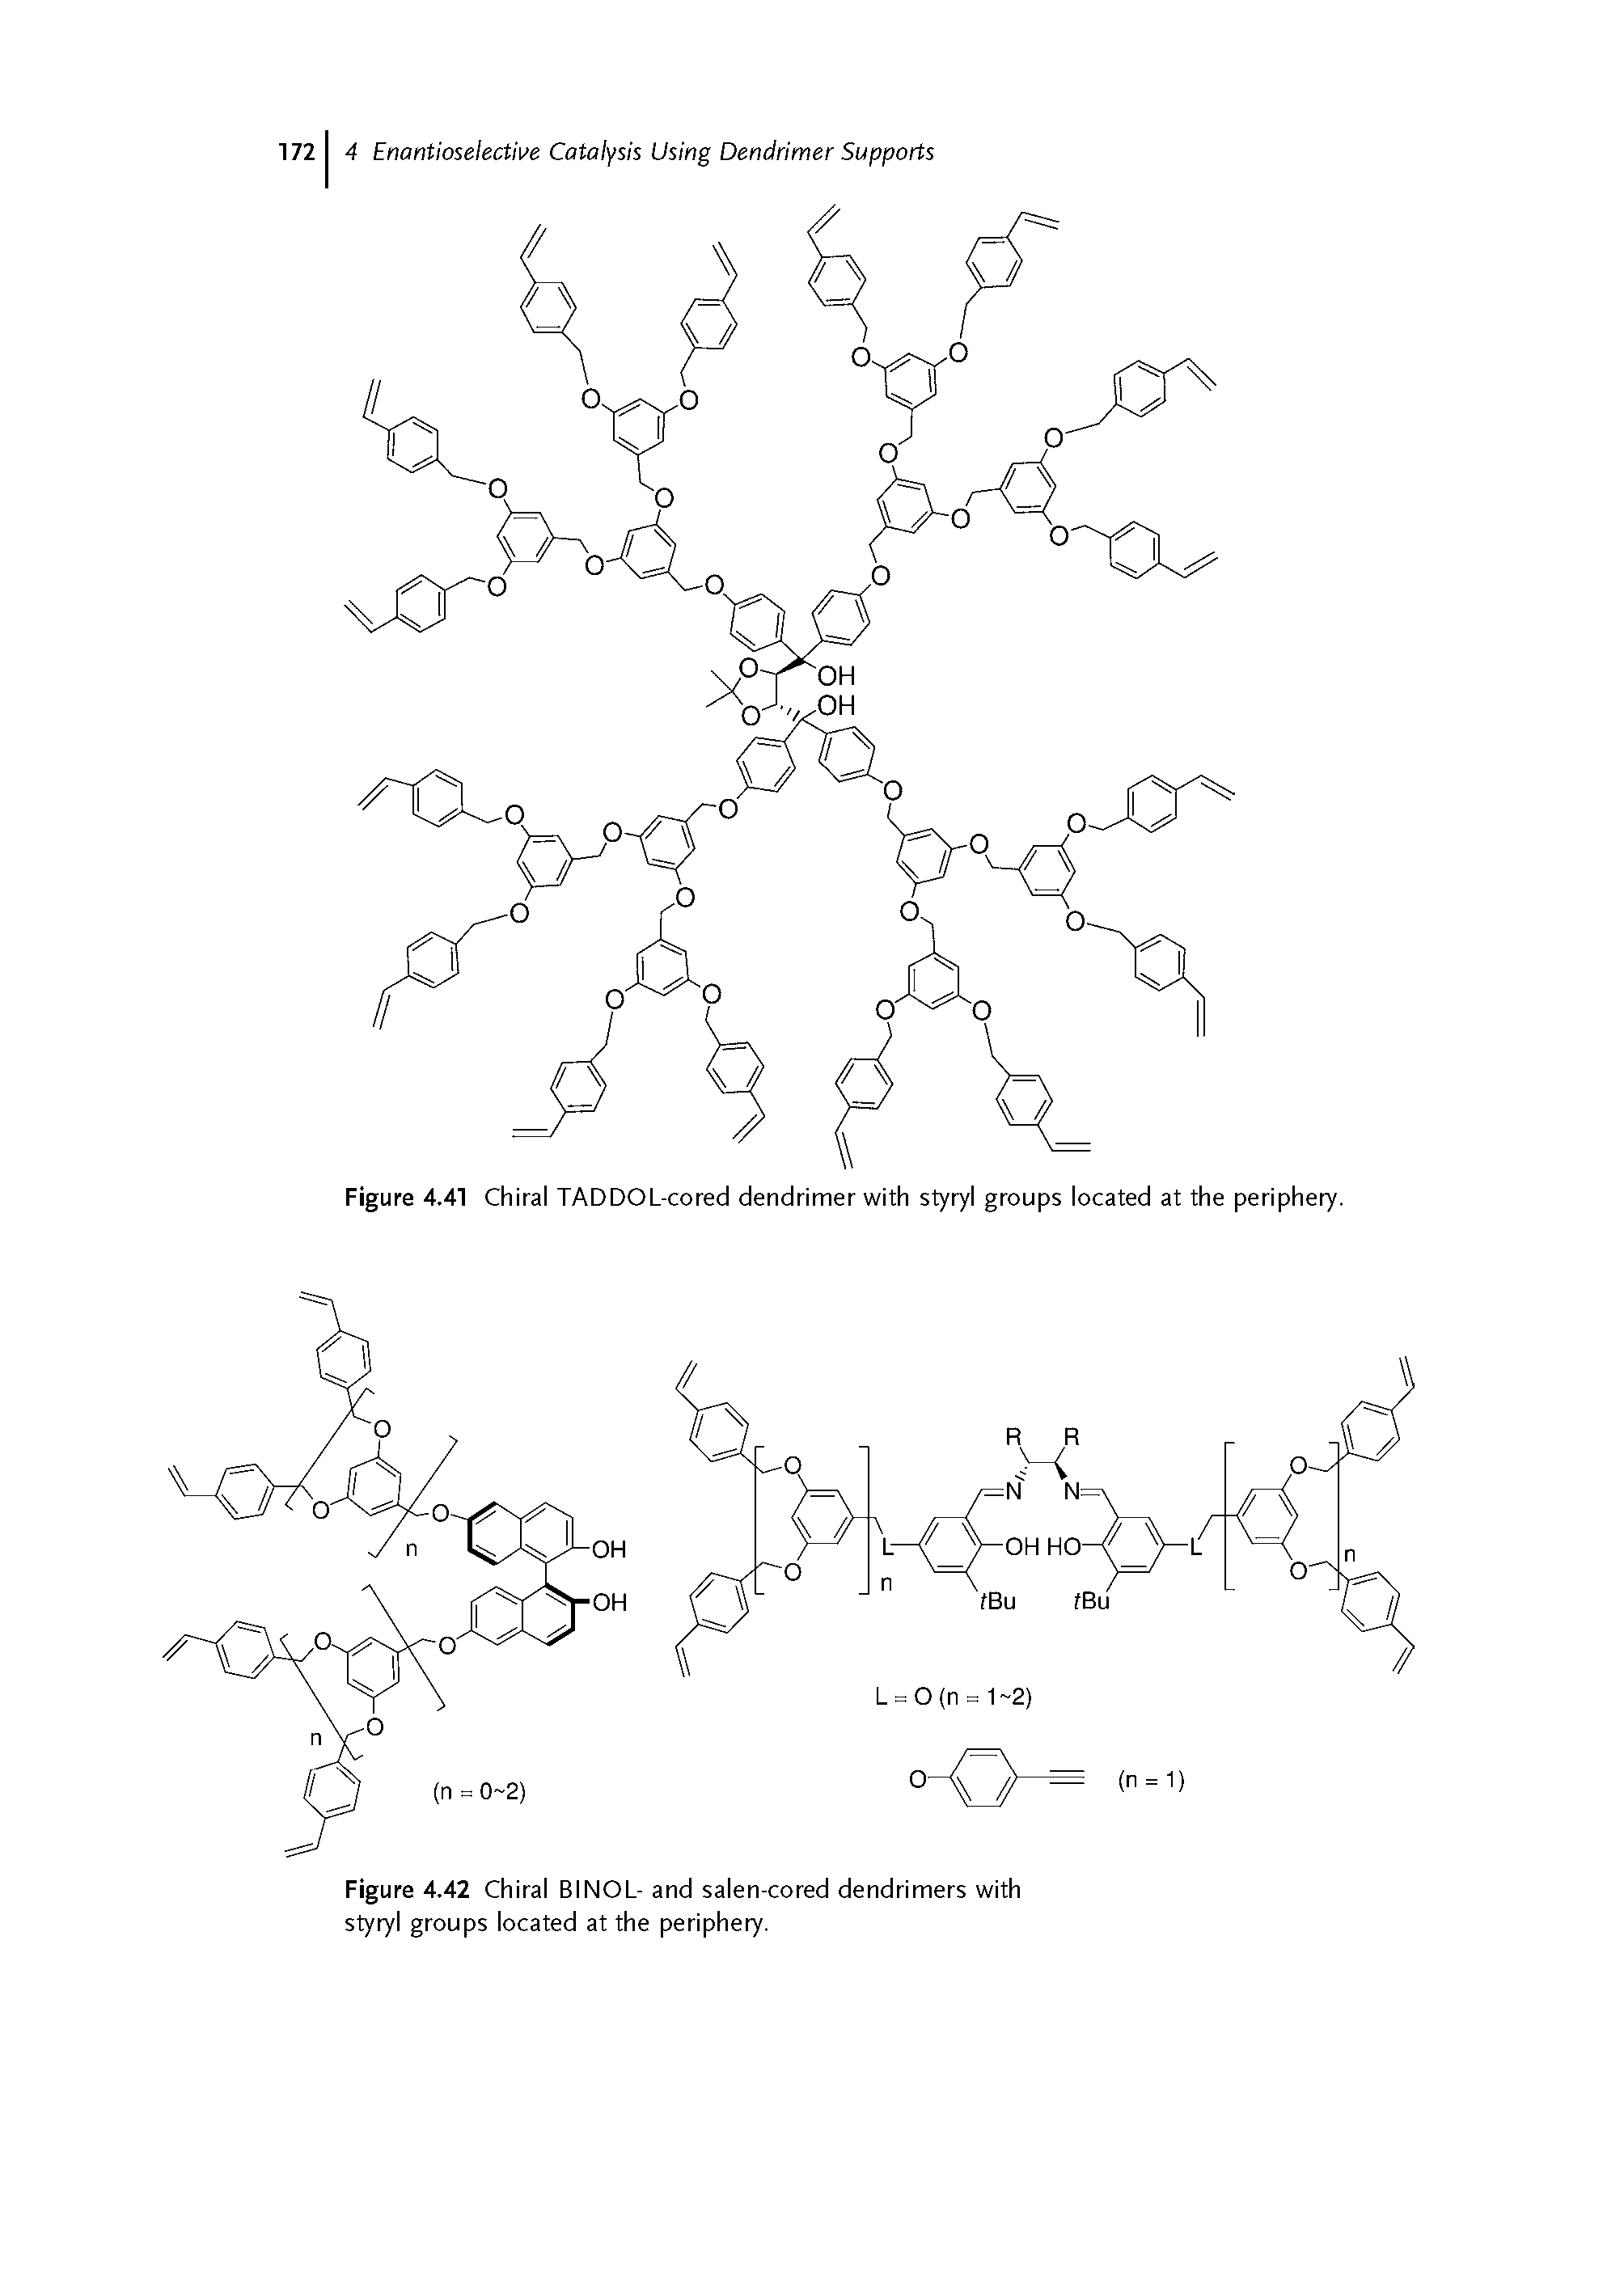 Figure 4.41 Chiral TADDOL-cored dendrimer with styryl groups located at the periphery.